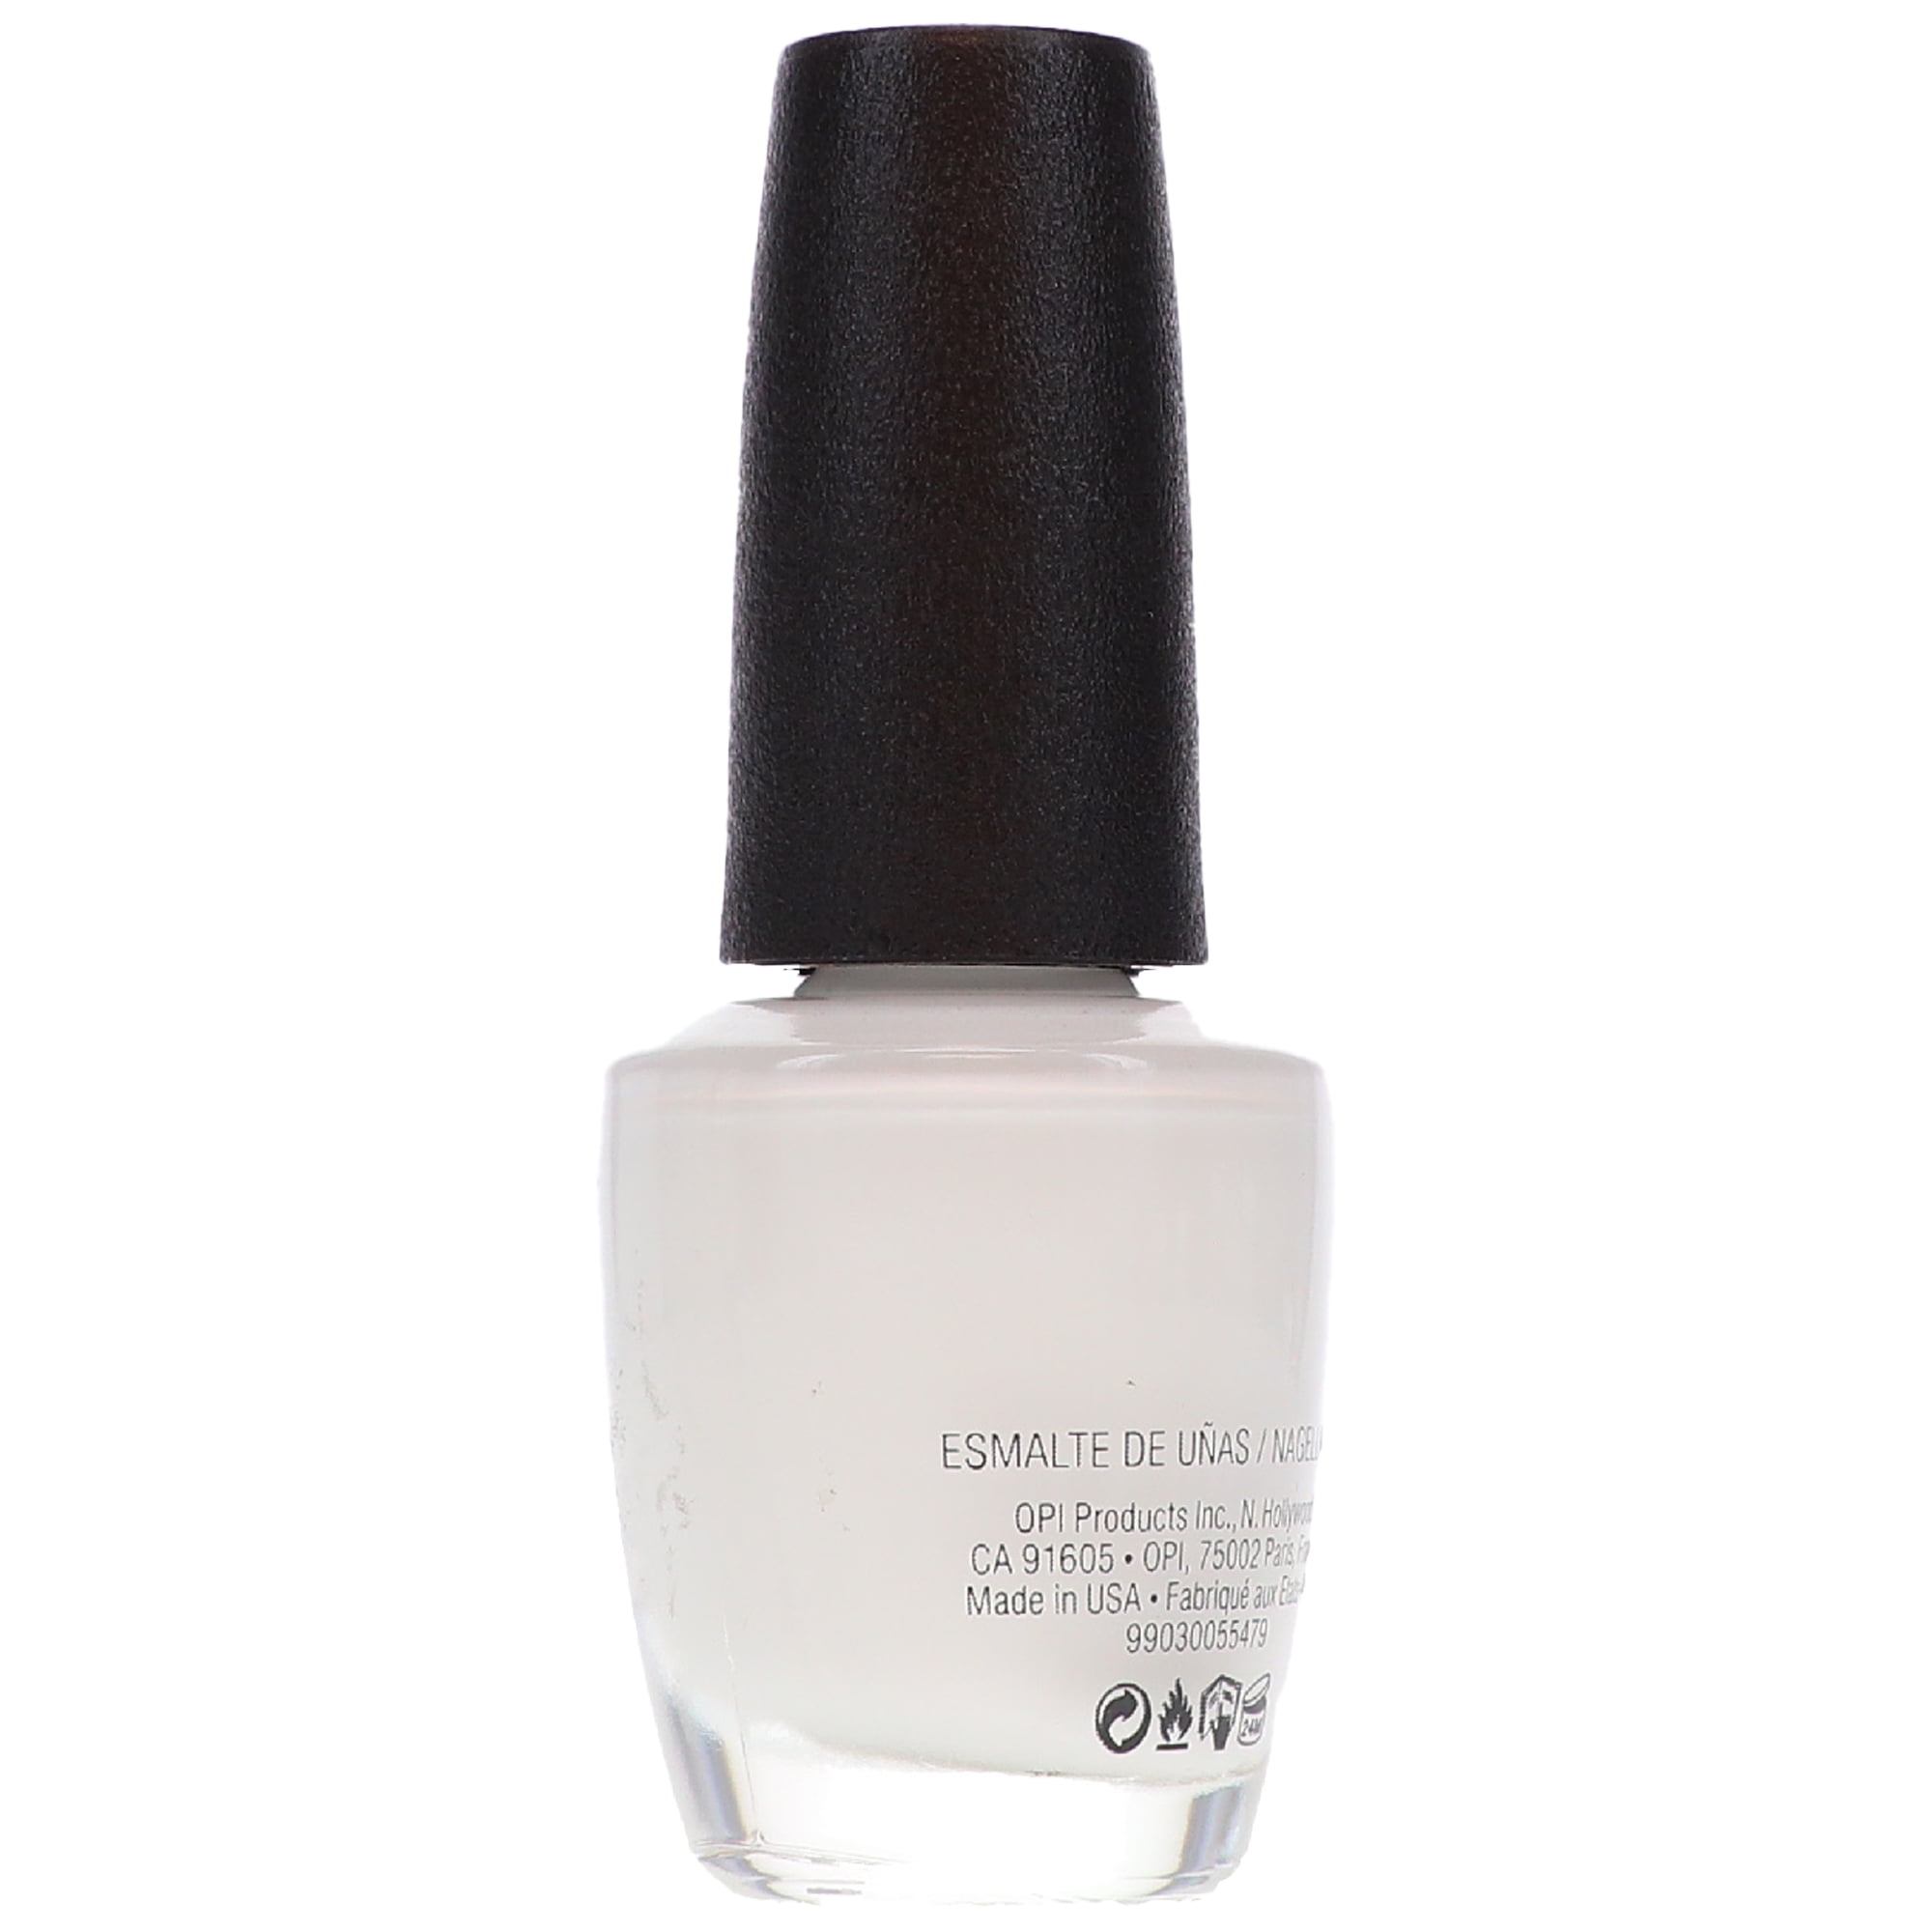 OPI NAIL LACQUER - NLS017 - SNATCH'D SILVER